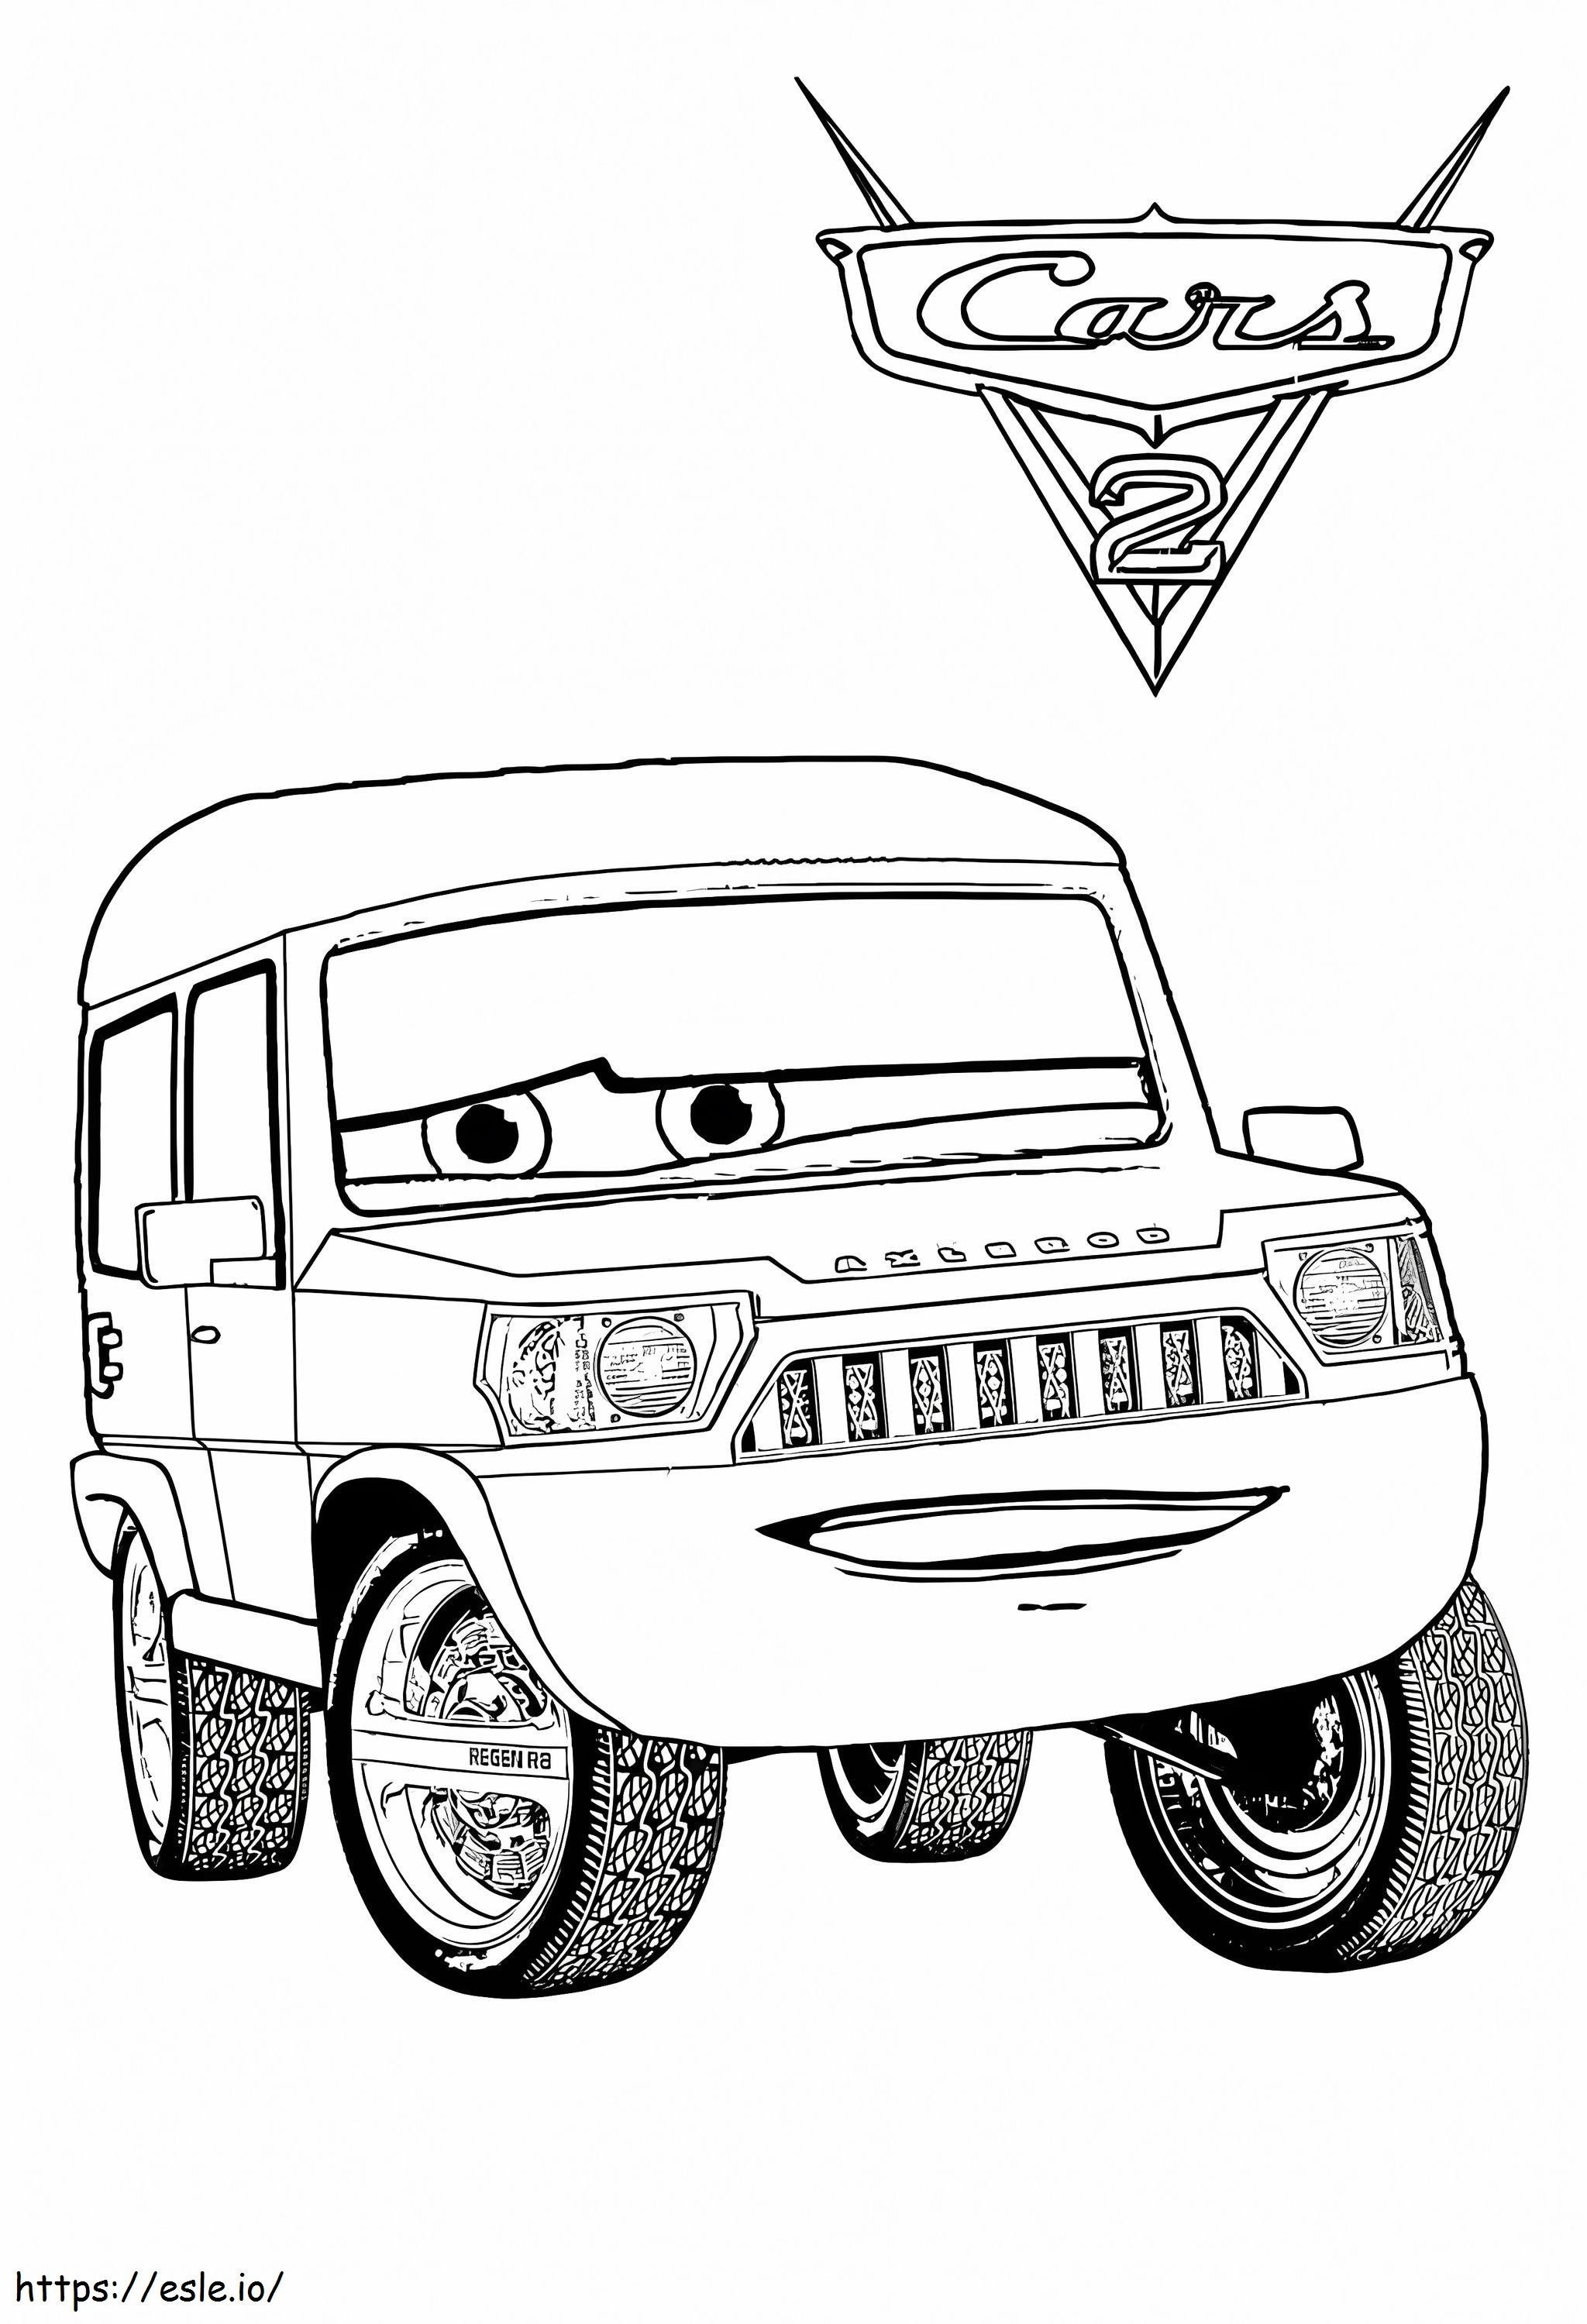 Car Character coloring page